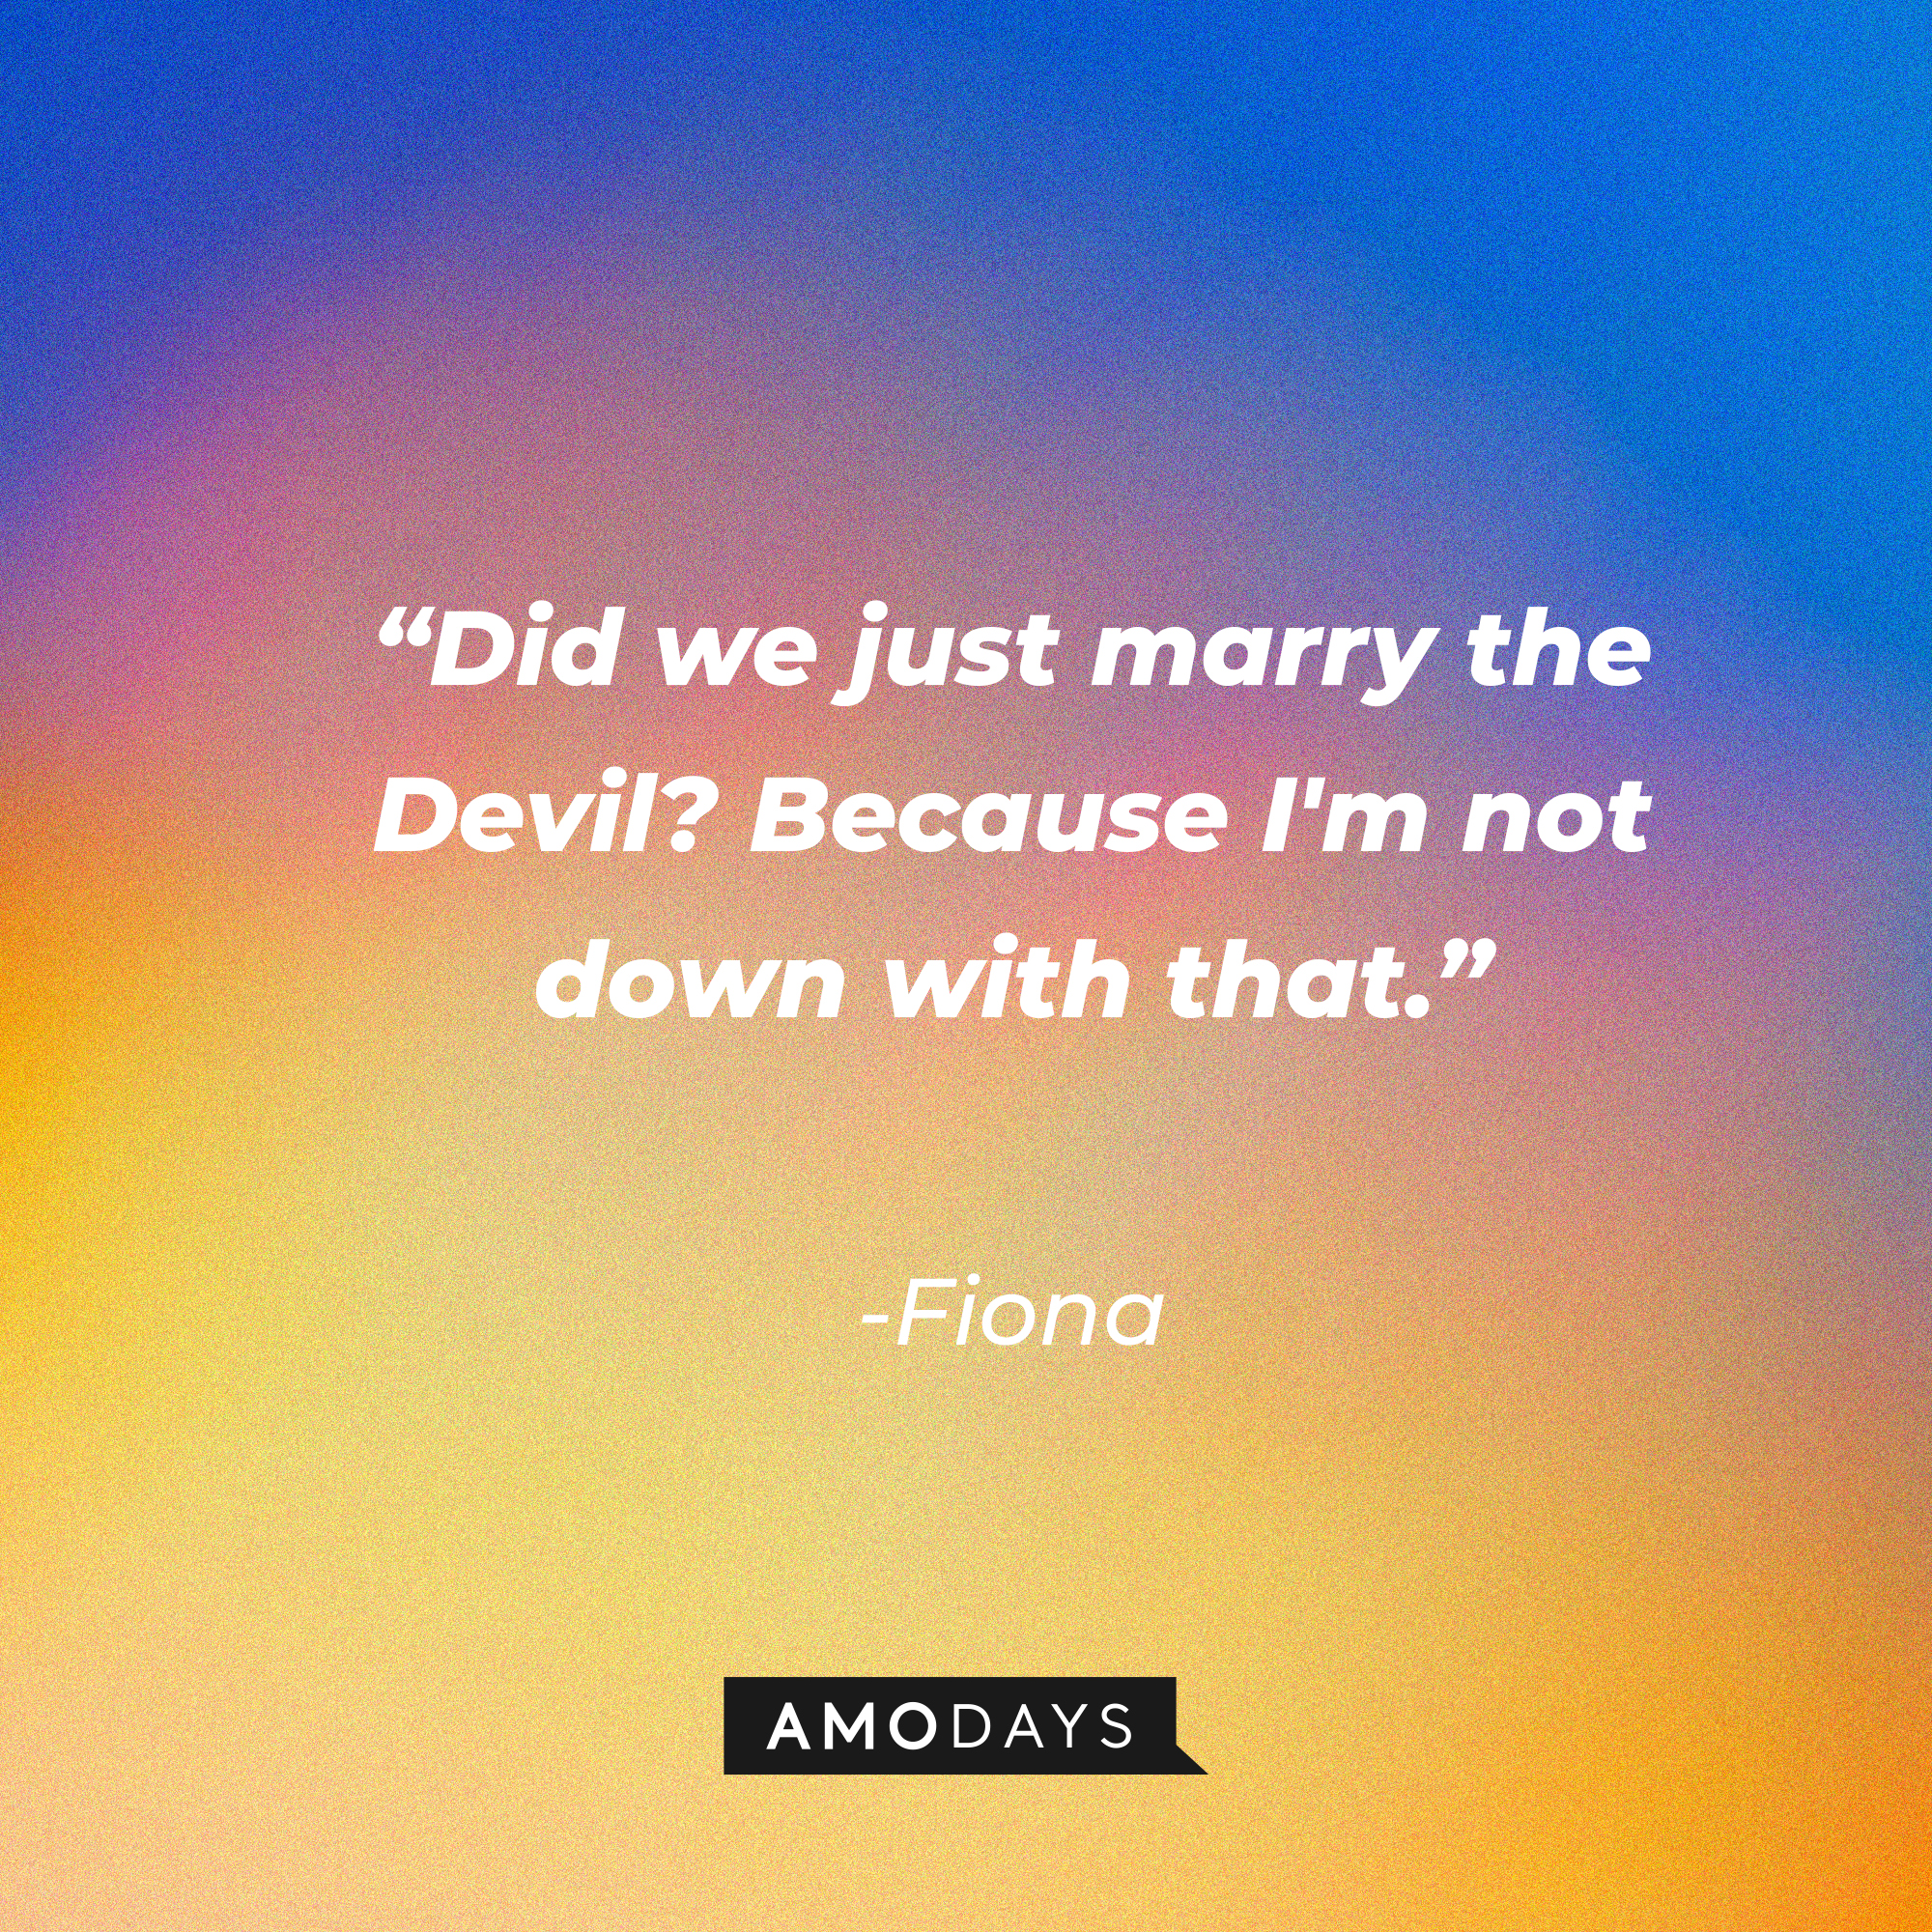 Fiona’s quote: “Did we just marry the Devil? Because I'm not down with that.” | Source: AmoDays